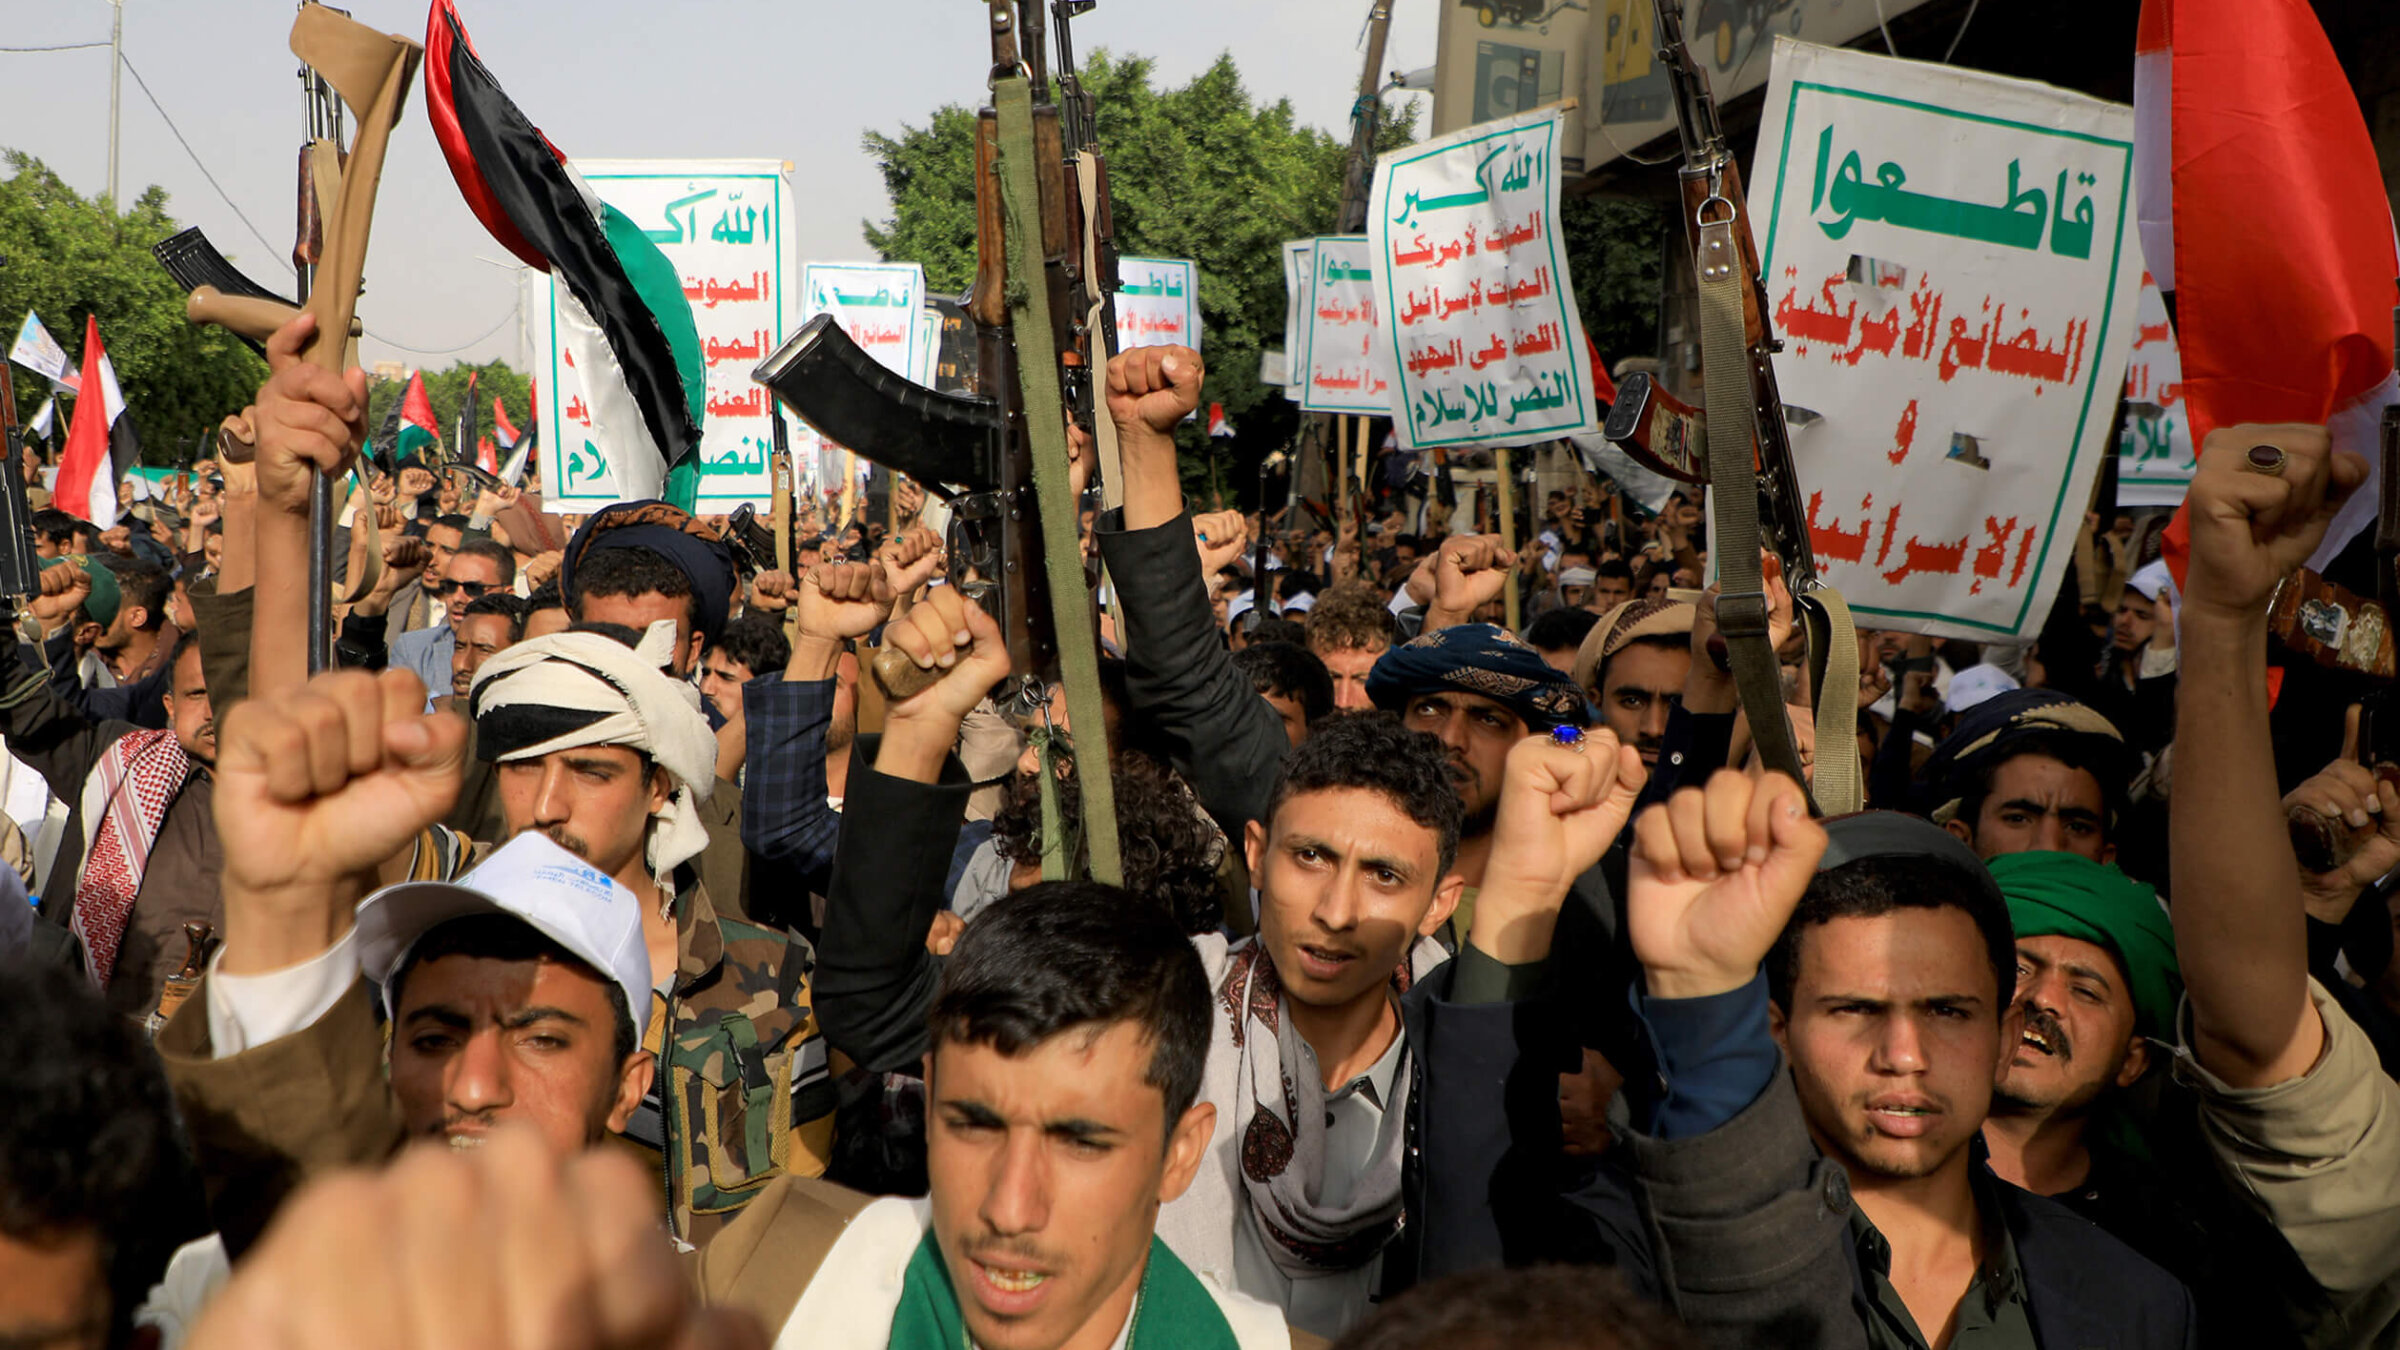 People brandishing weapons take to the streets of Yemen's Huthi-held capital Sanaa on Saturday in support of the Palestinians, after the militant group Hamas launched a surprise large-scale attack against Israel from Gaza.